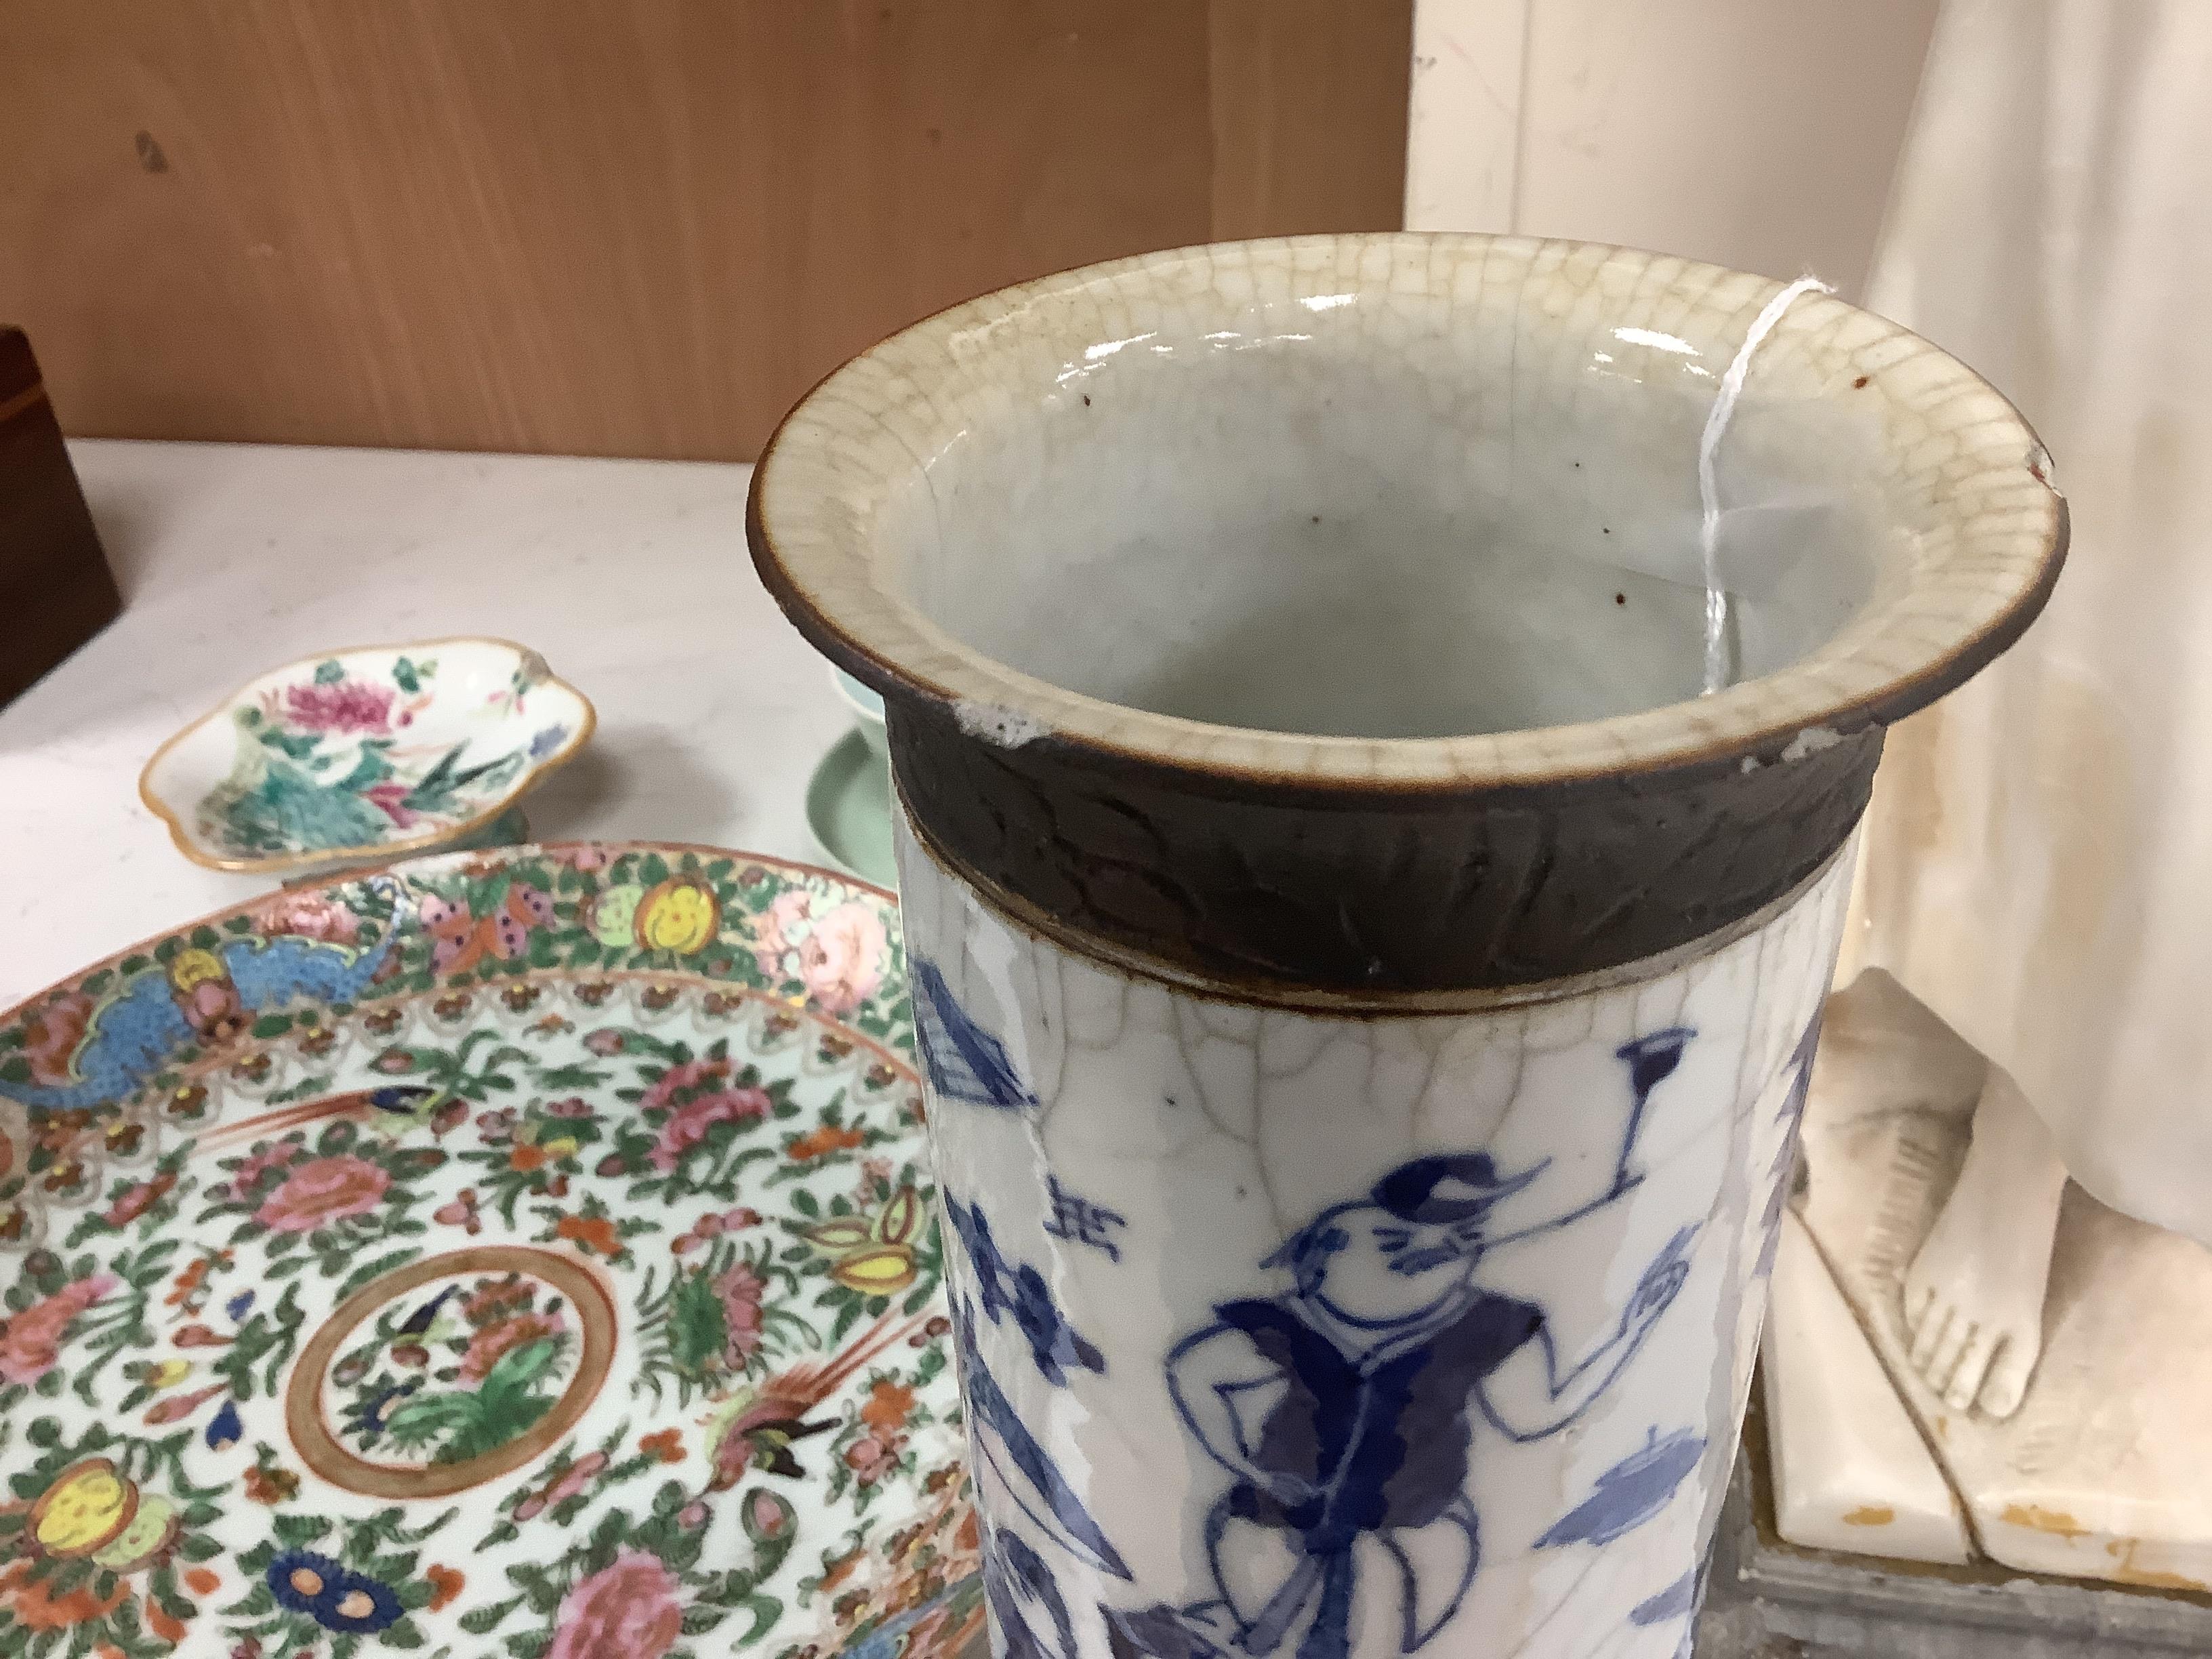 Five Chinese porcelain items including a blue and white crackle glaze cylindrical vase and a celadon glaze tea bowl and stand, largest 29cm in diameter